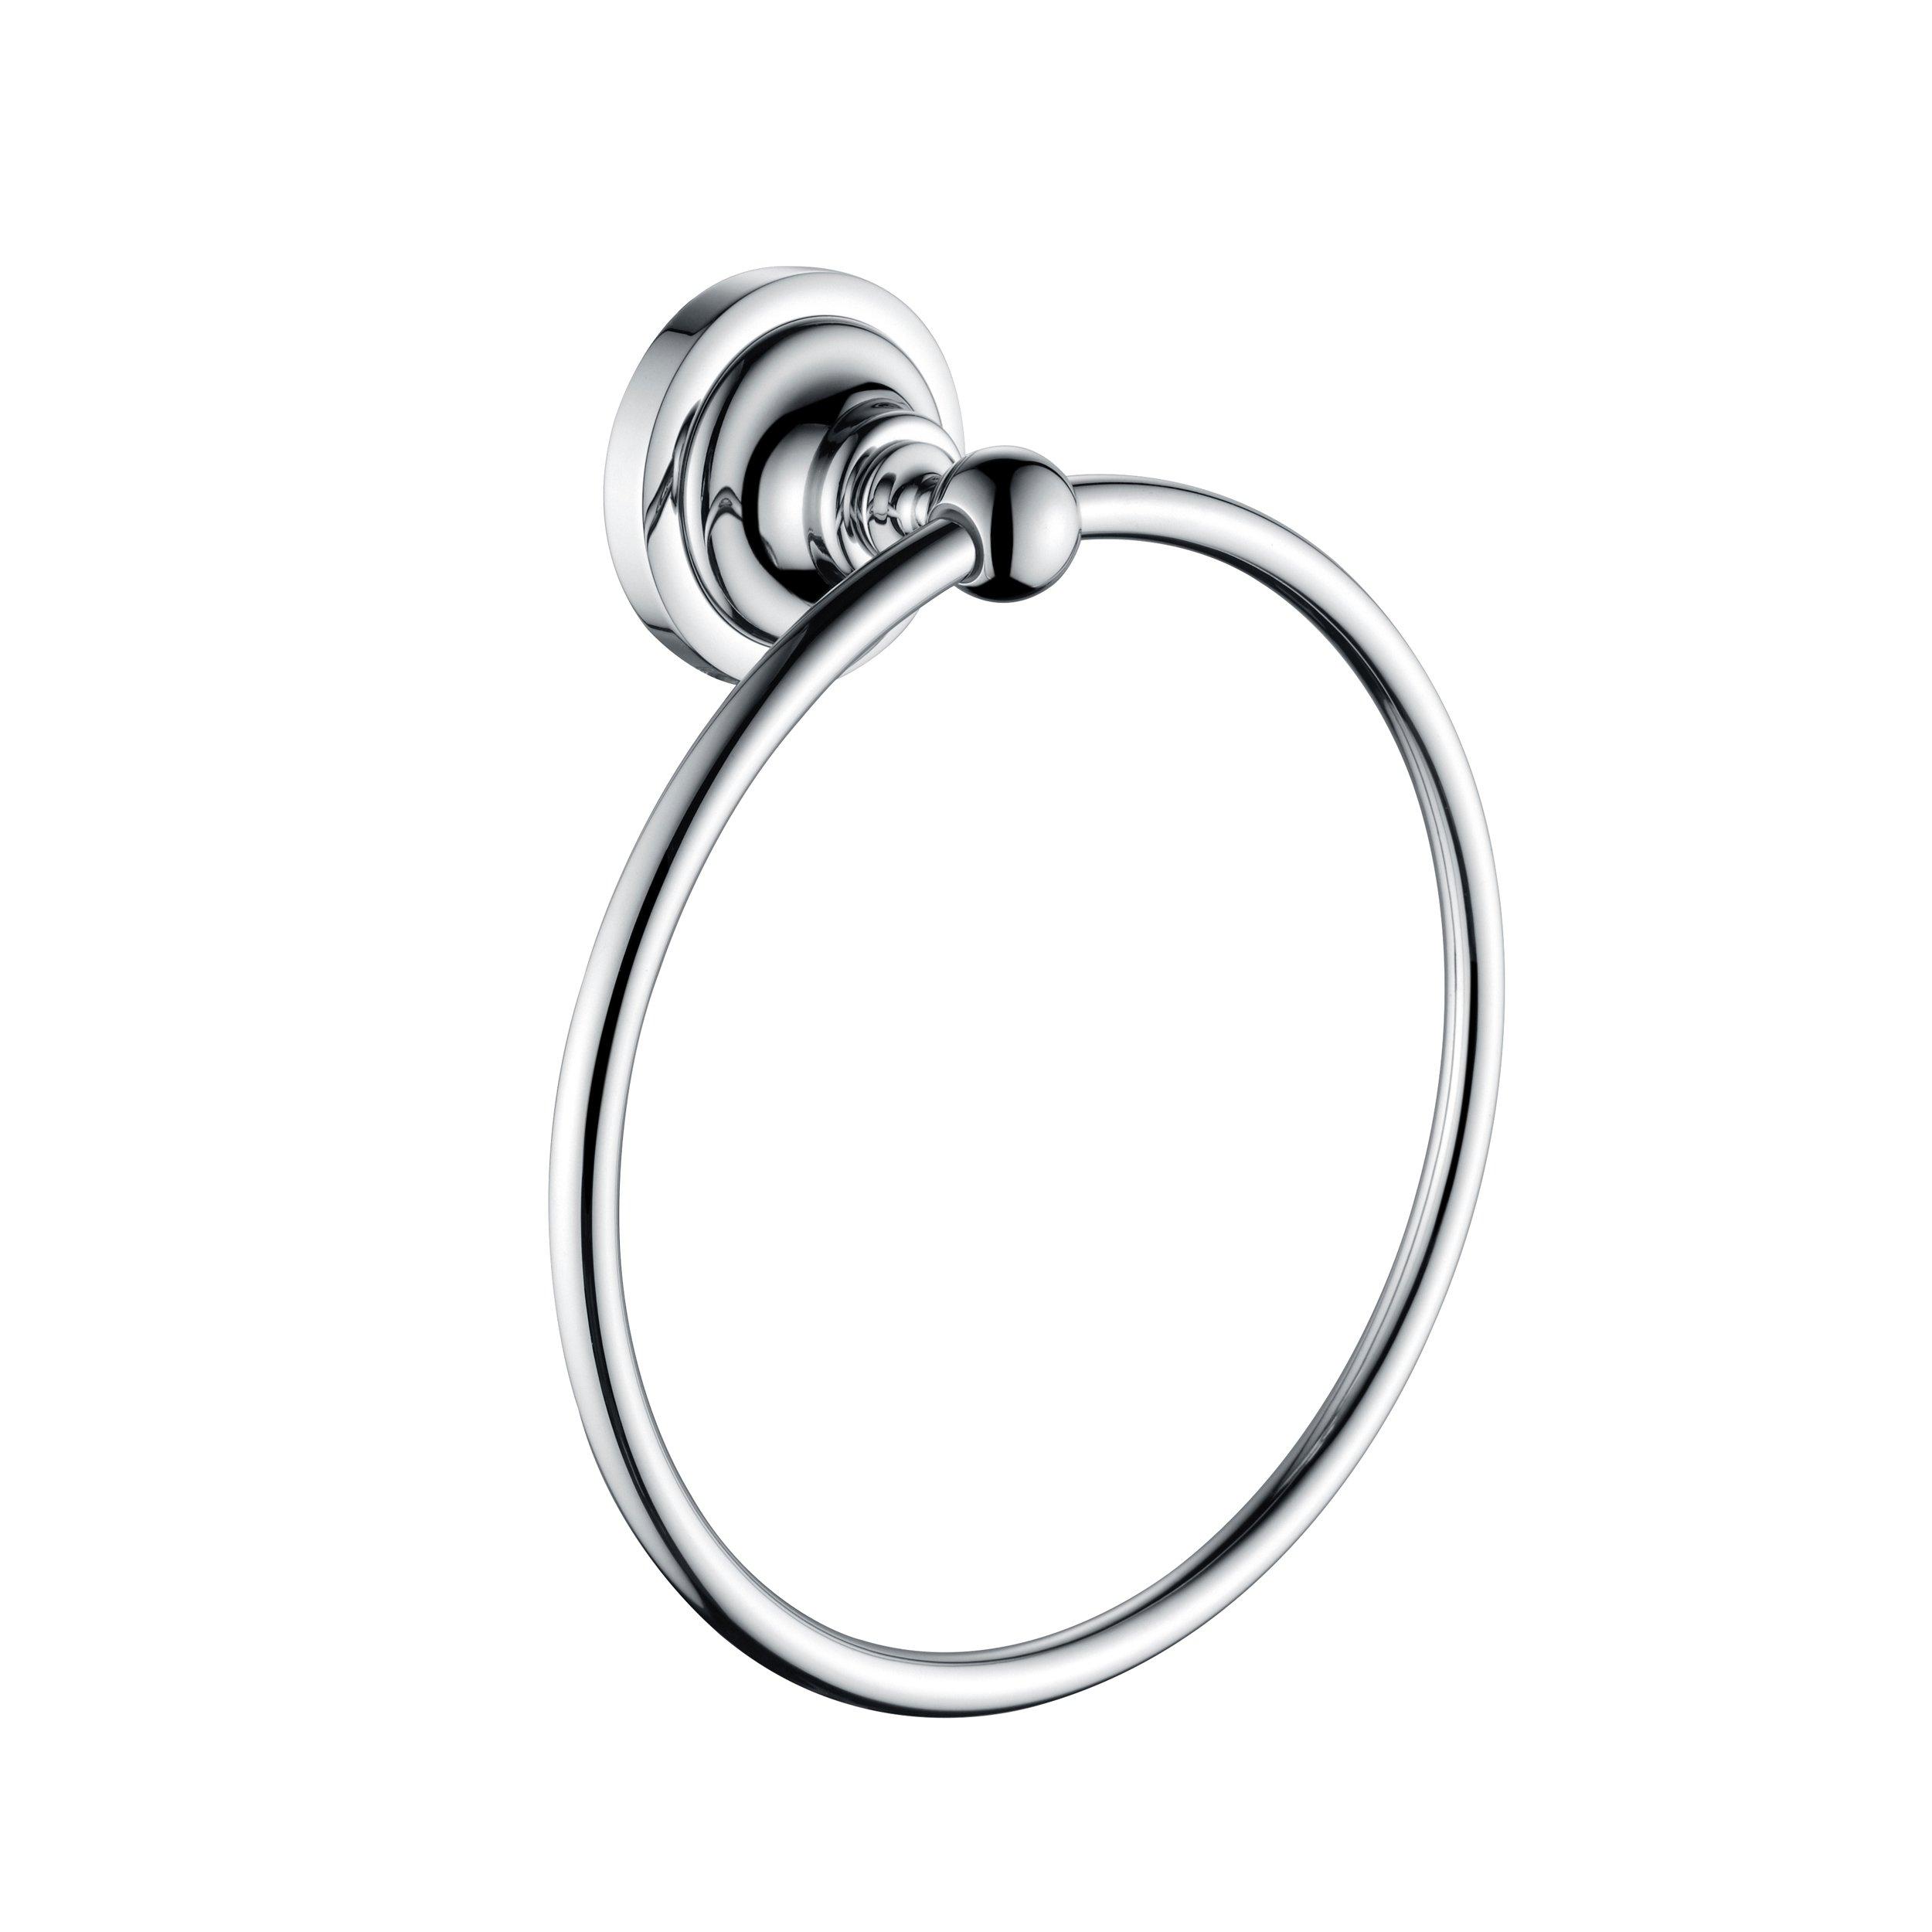 Traditional Chrome Towel Ring